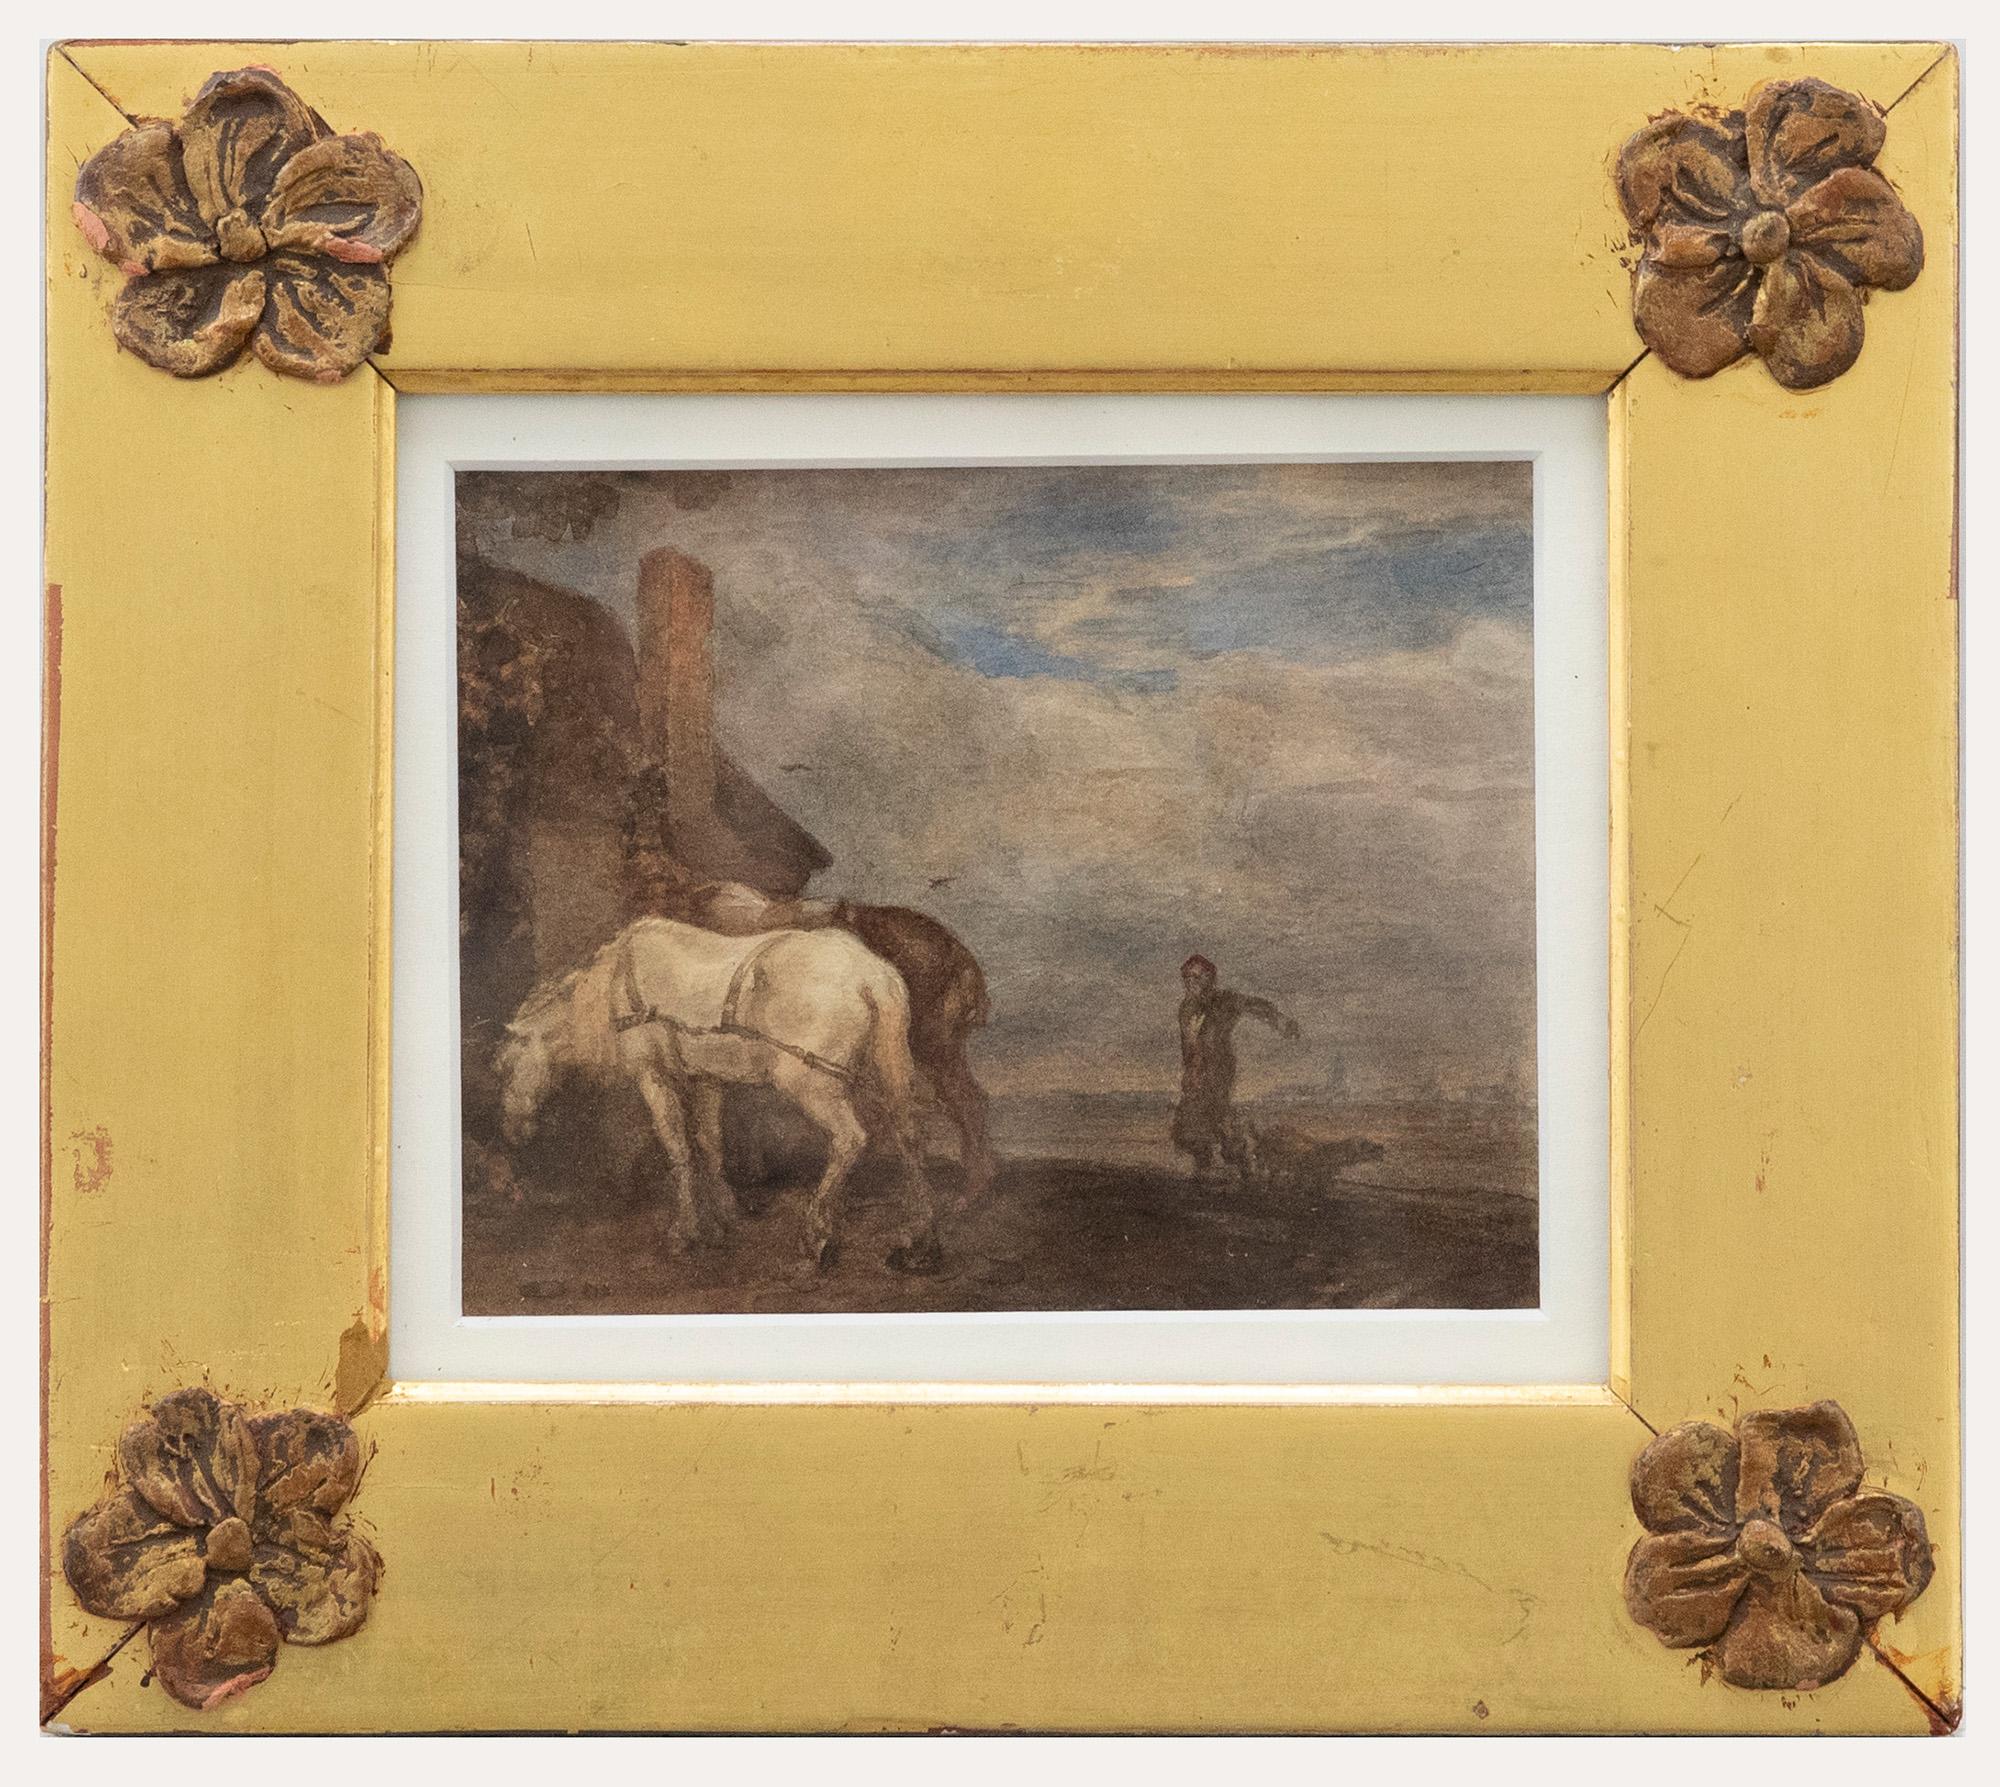 Unknown Landscape Art - Manner of Philips Wouwerman (1619-1668) - Framed Watercolour, Watering Horses